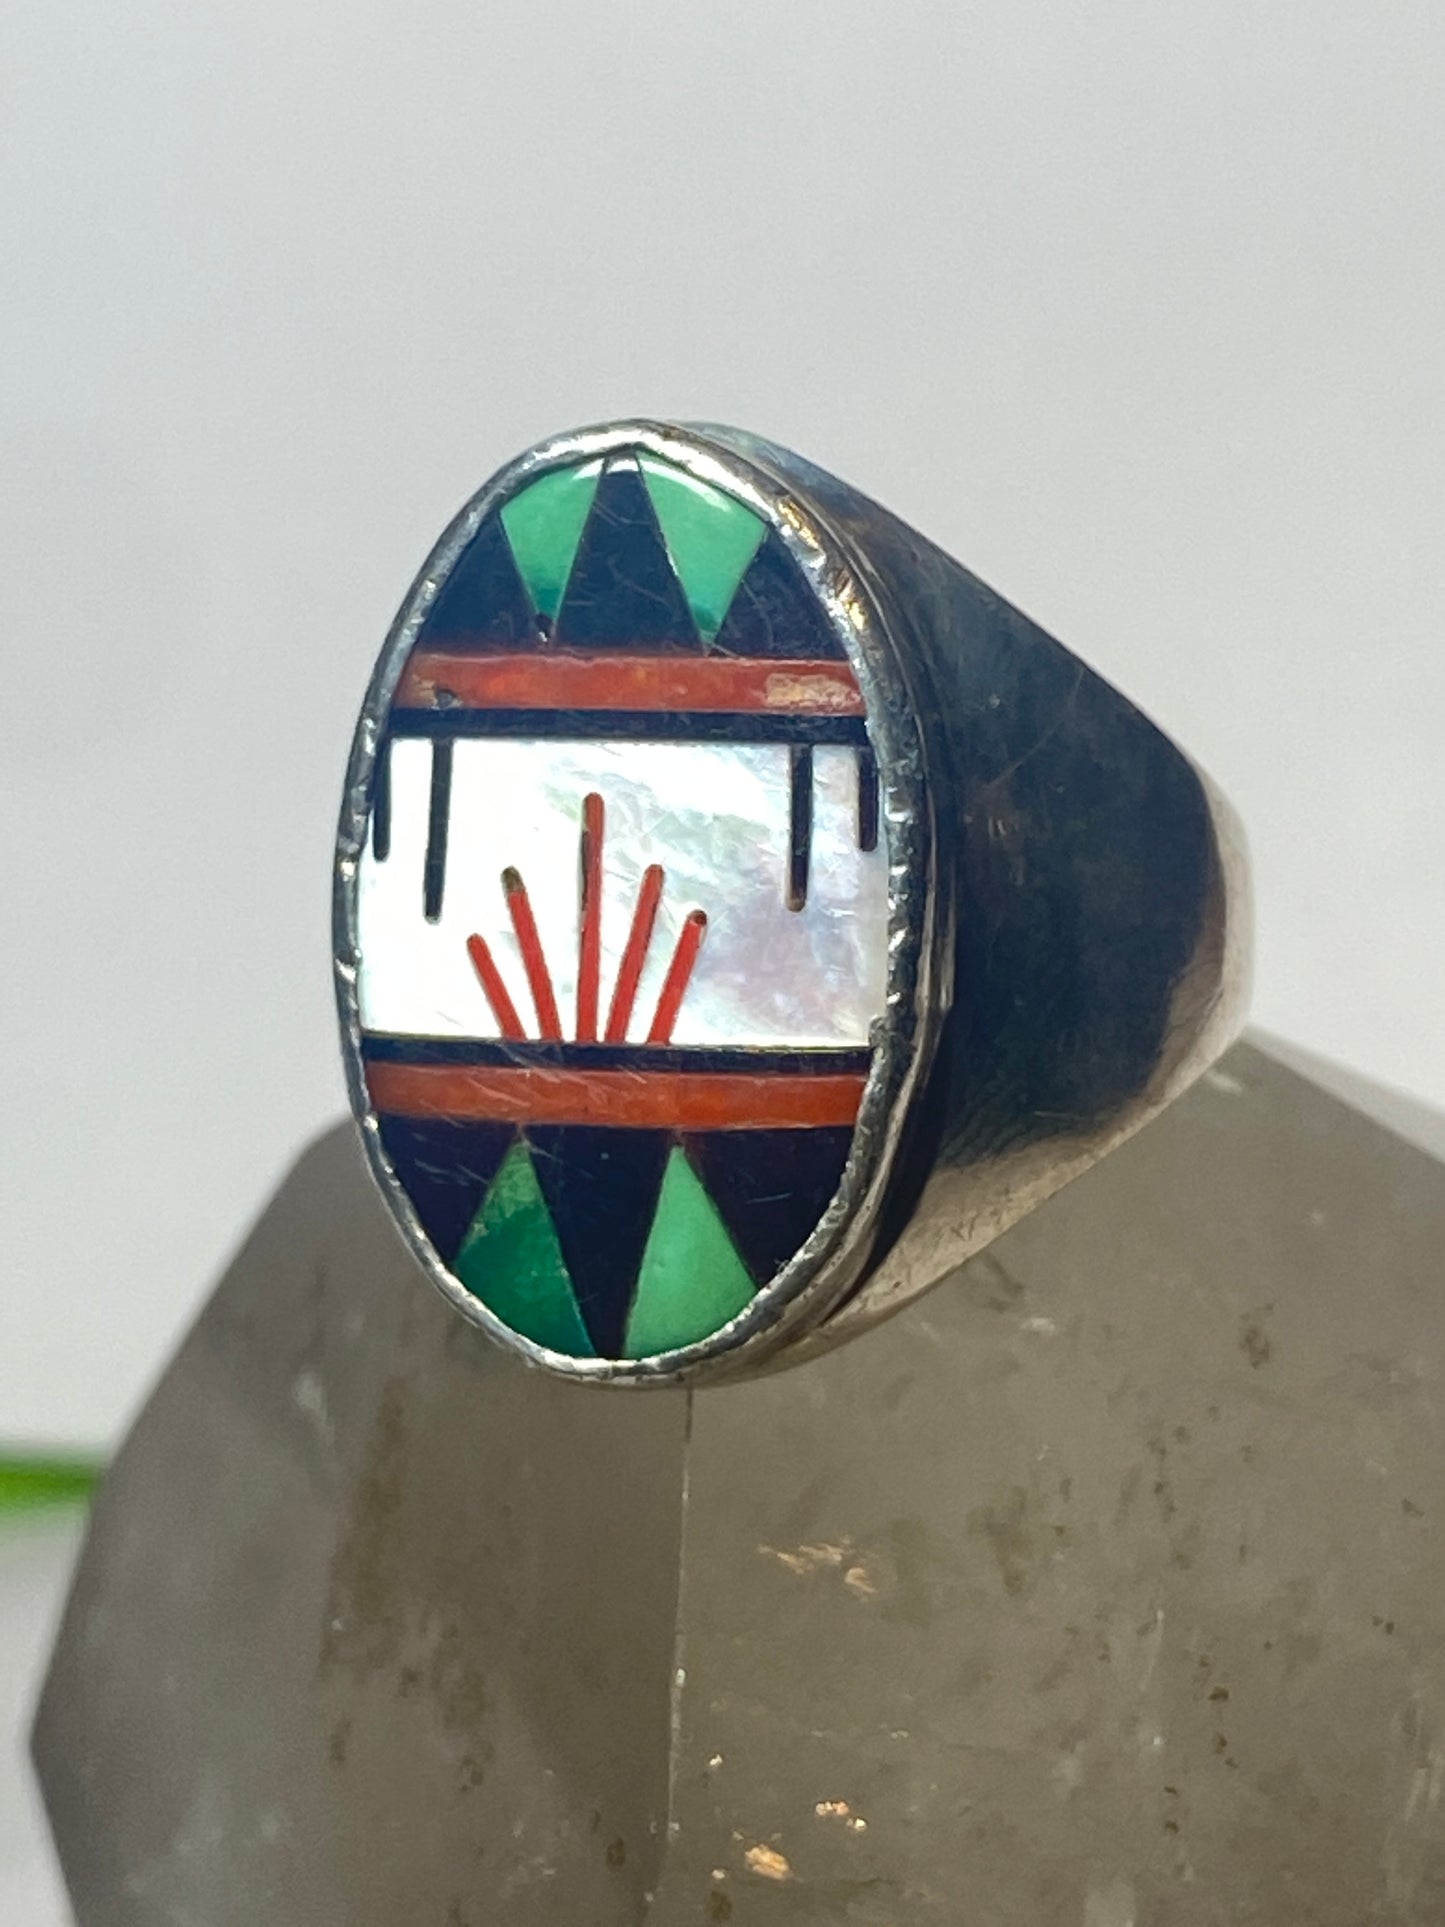 Turquoise ring Zuni mother of pearl onyx coral inlay sterling silver women men